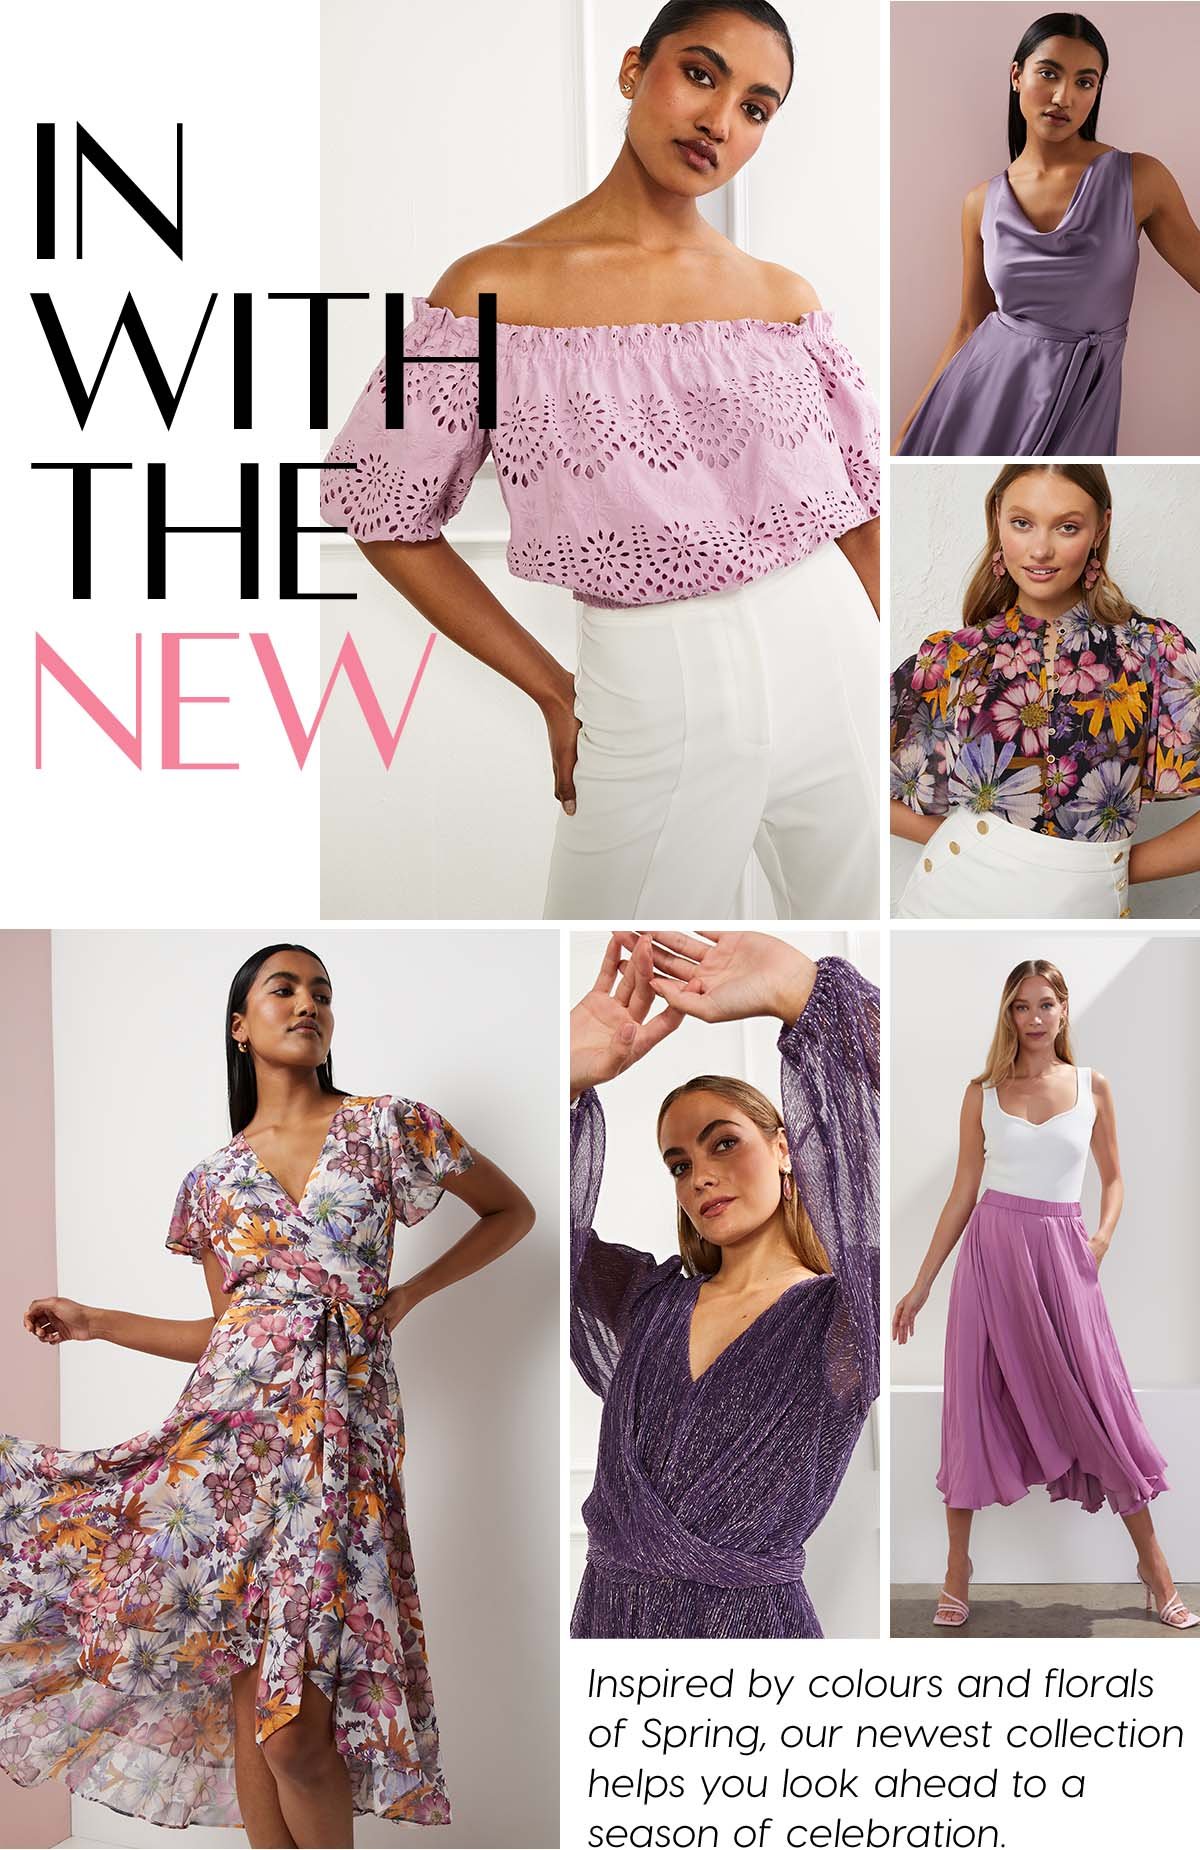 In With The New. Inspired by colours and florals of Spring, our newest collection helps you look ahead to a season of celebration.